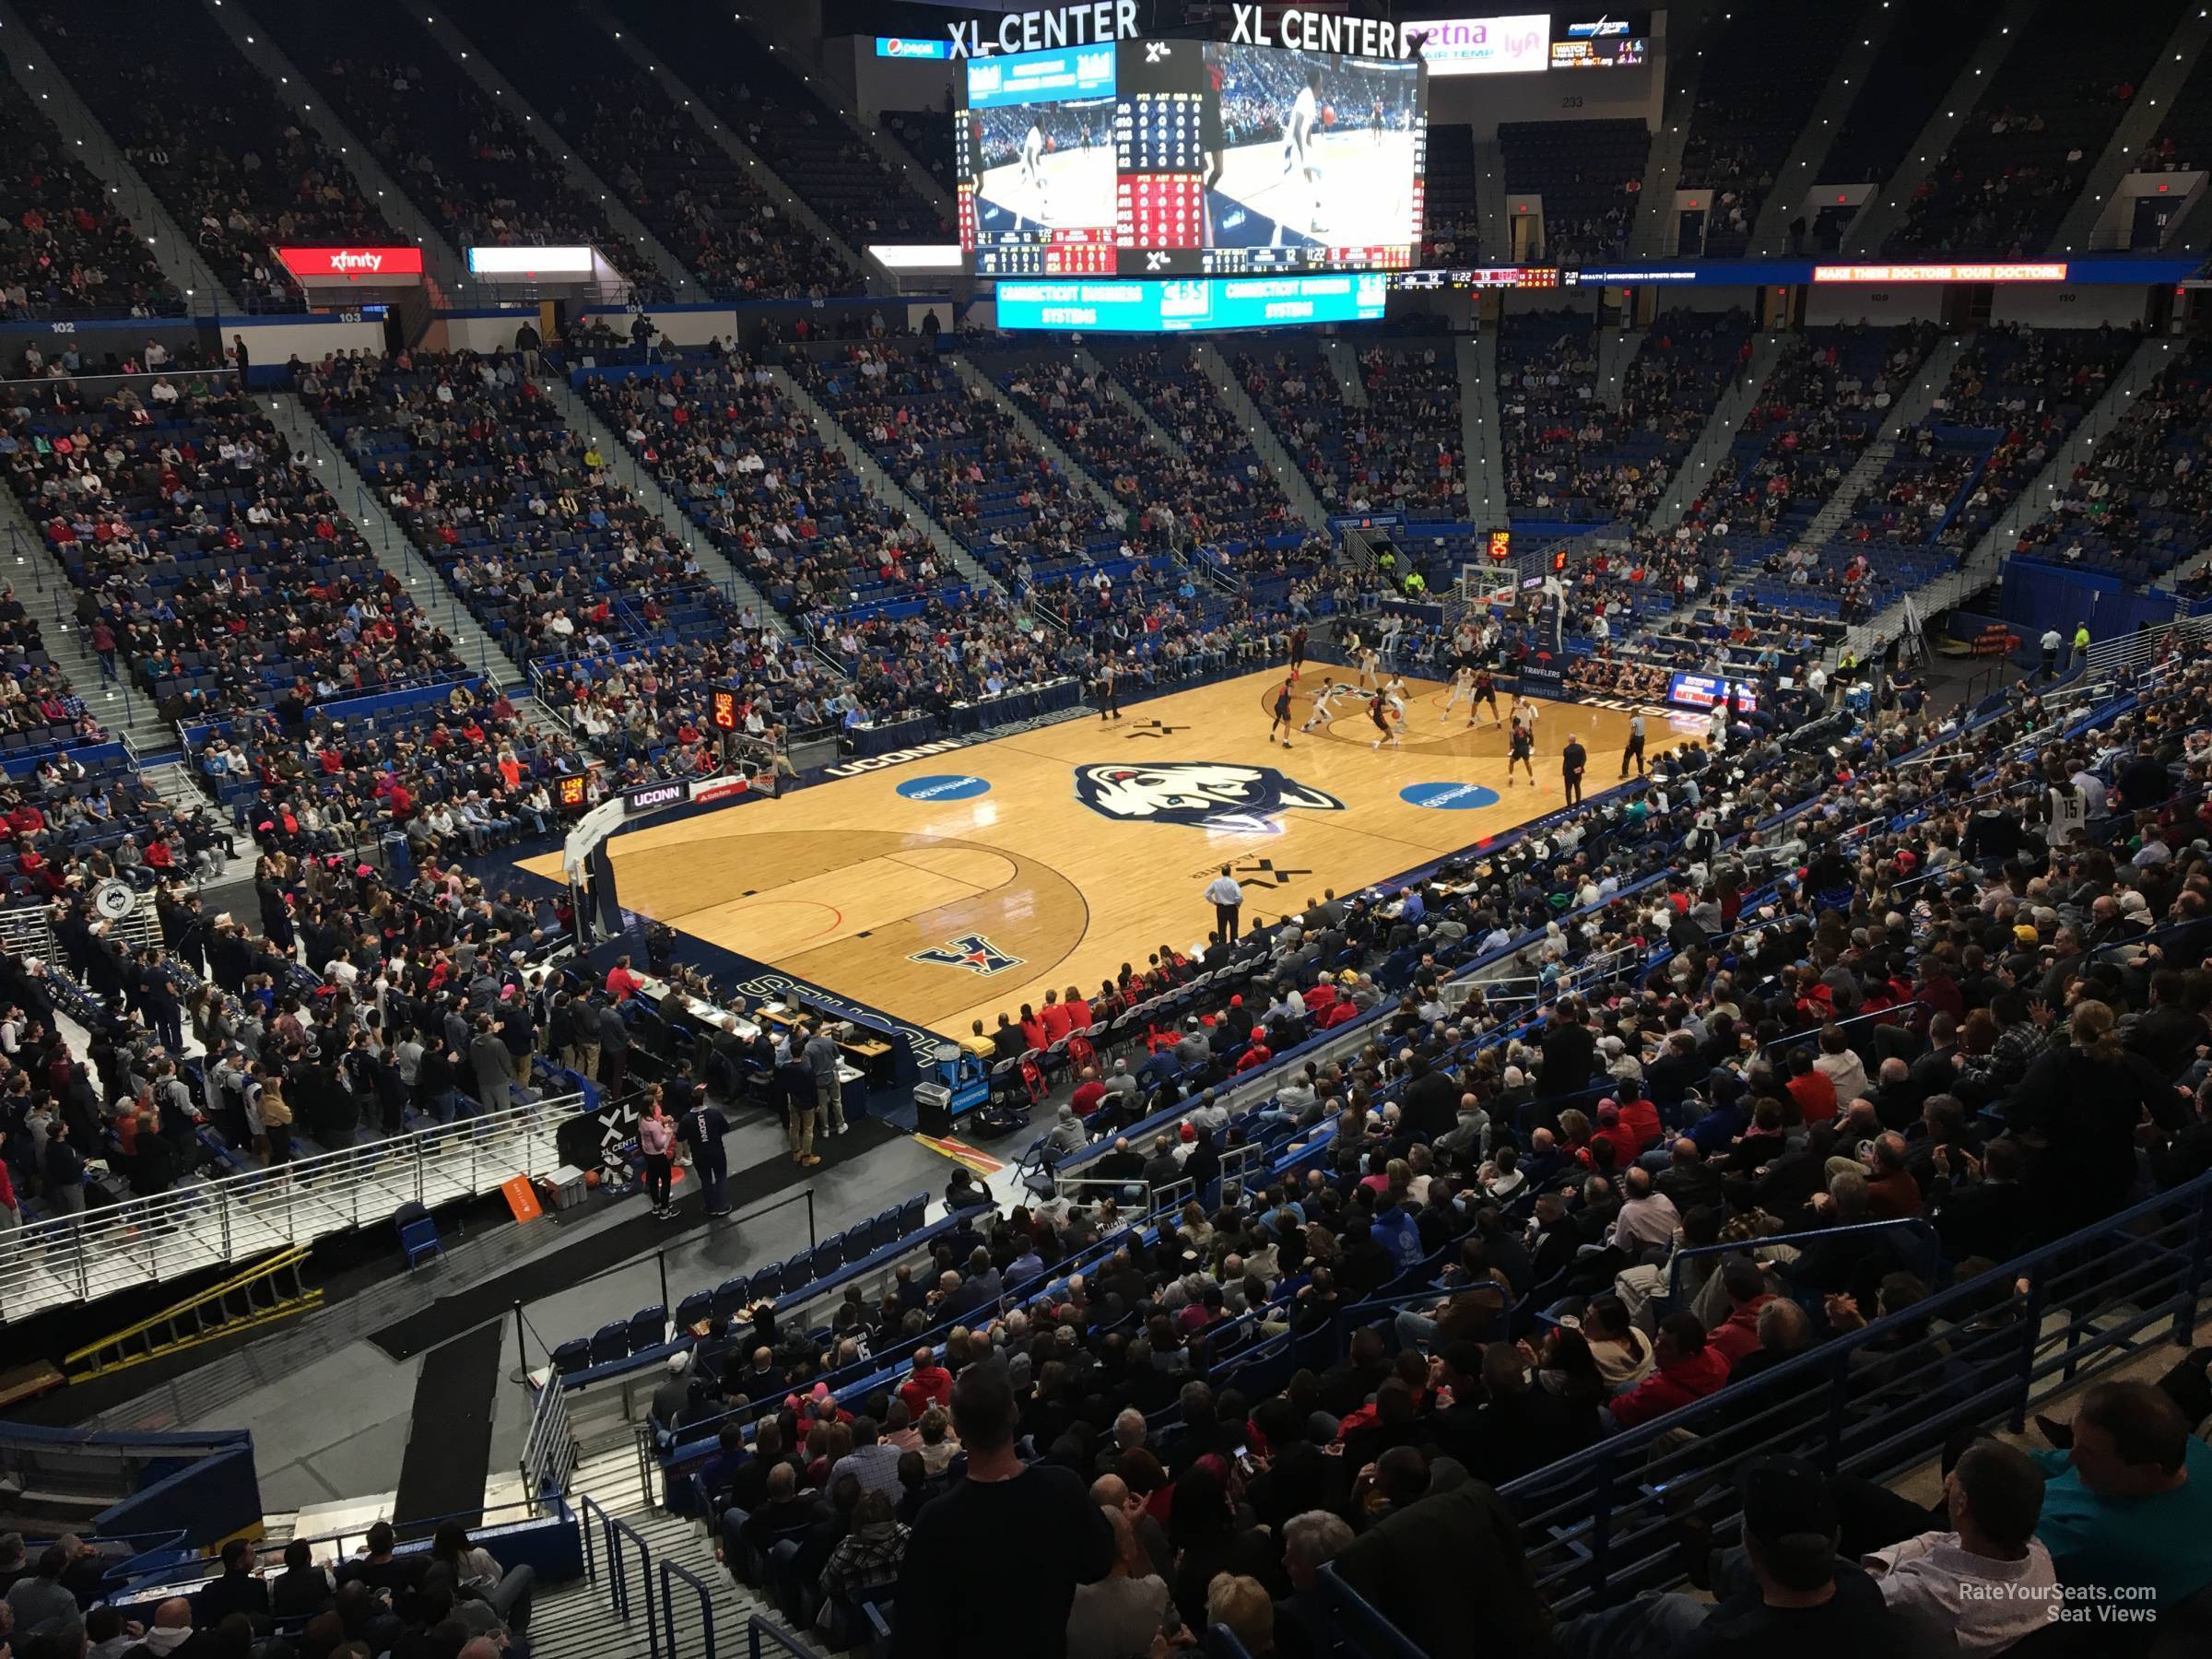 section 219, row a seat view  - xl center